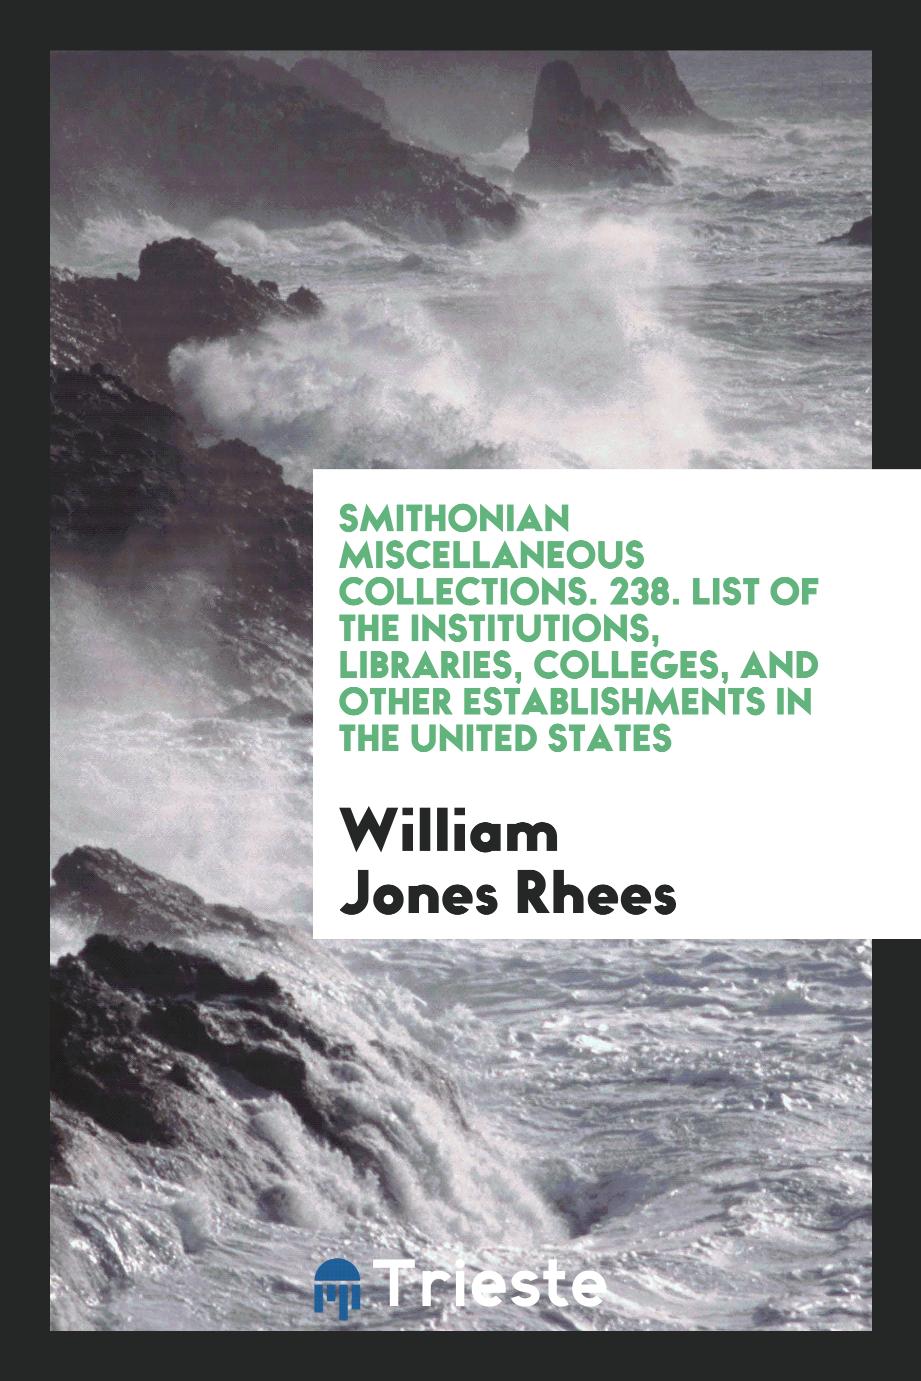 Smithonian Miscellaneous Collections. 238. List of the Institutions, Libraries, Colleges, and Other Establishments in the United States